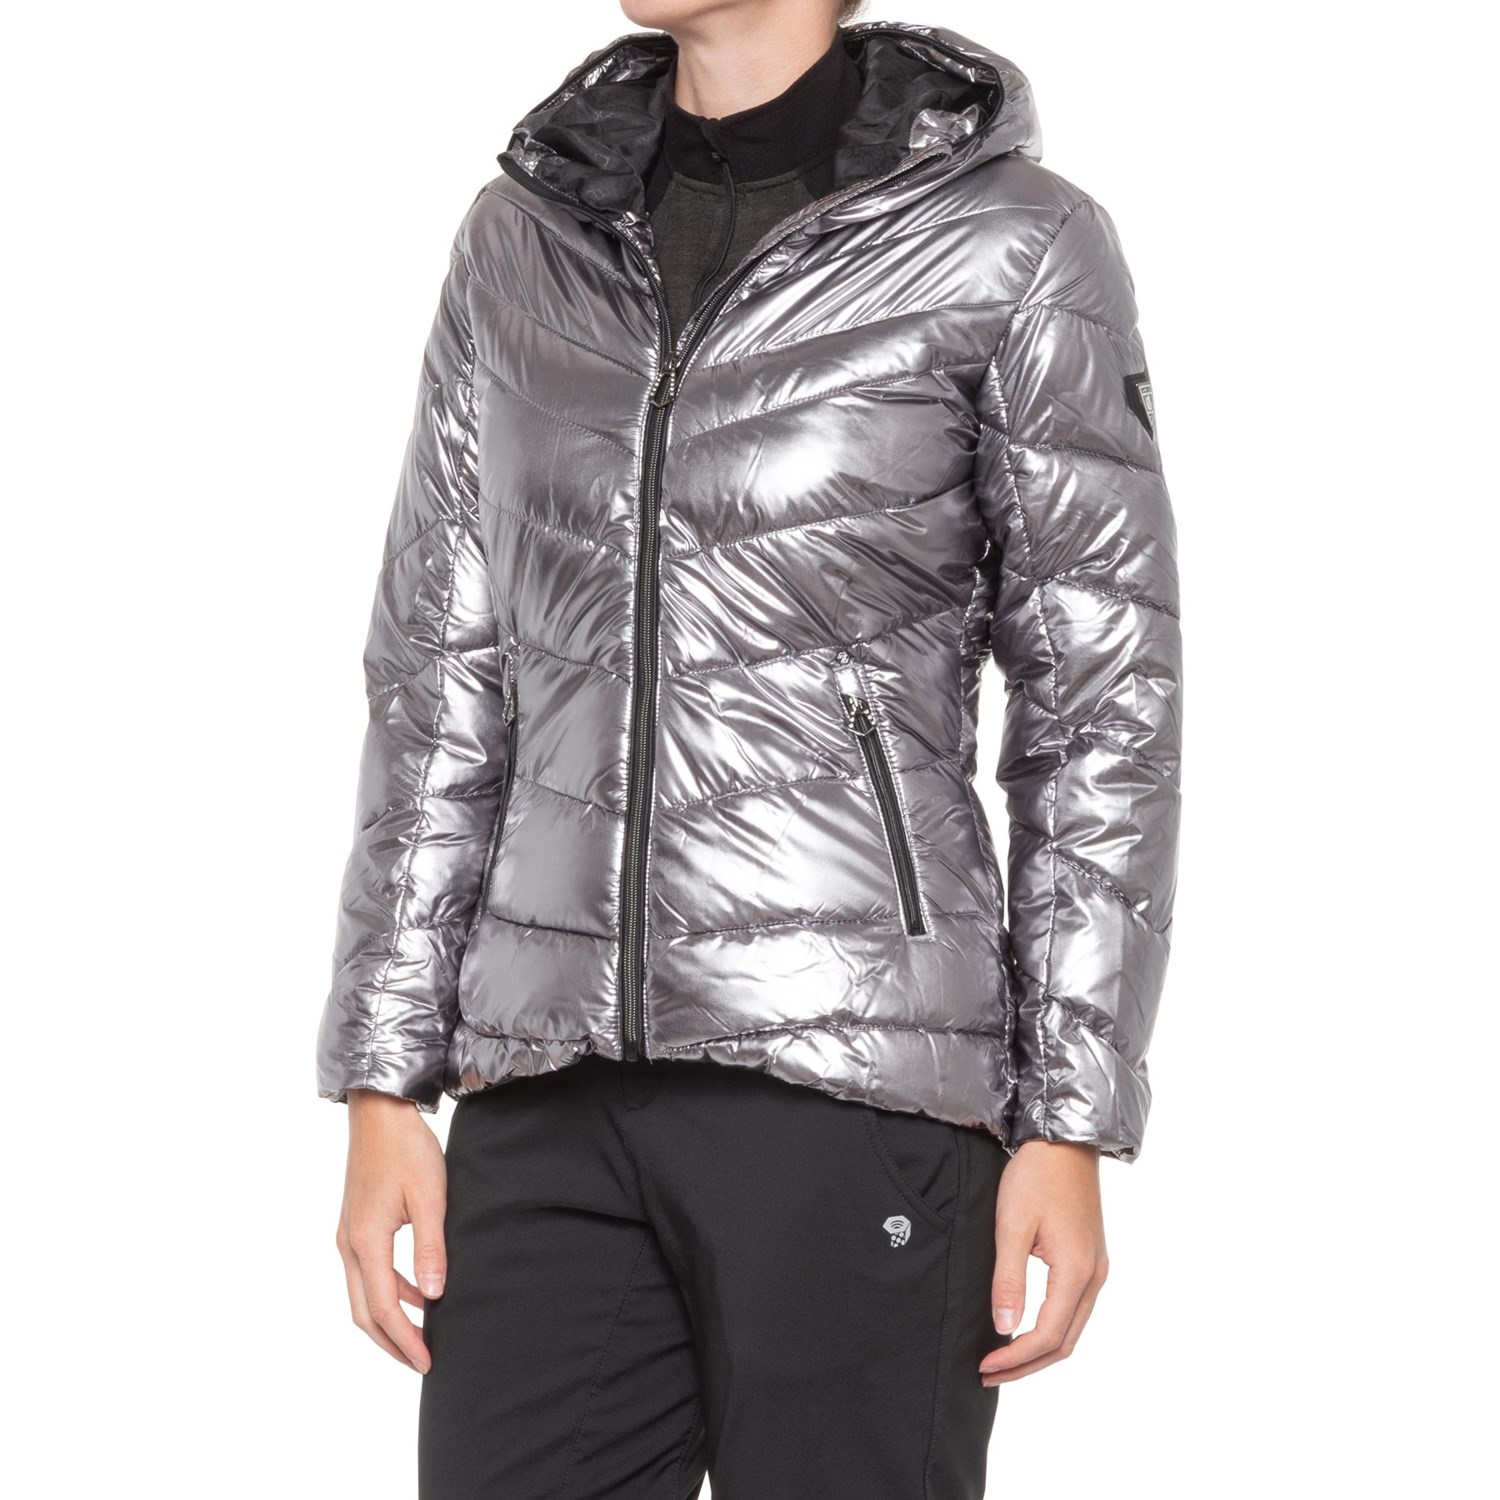 Dare2b Reputable Puffer Jacket (For Women) - Save 65%